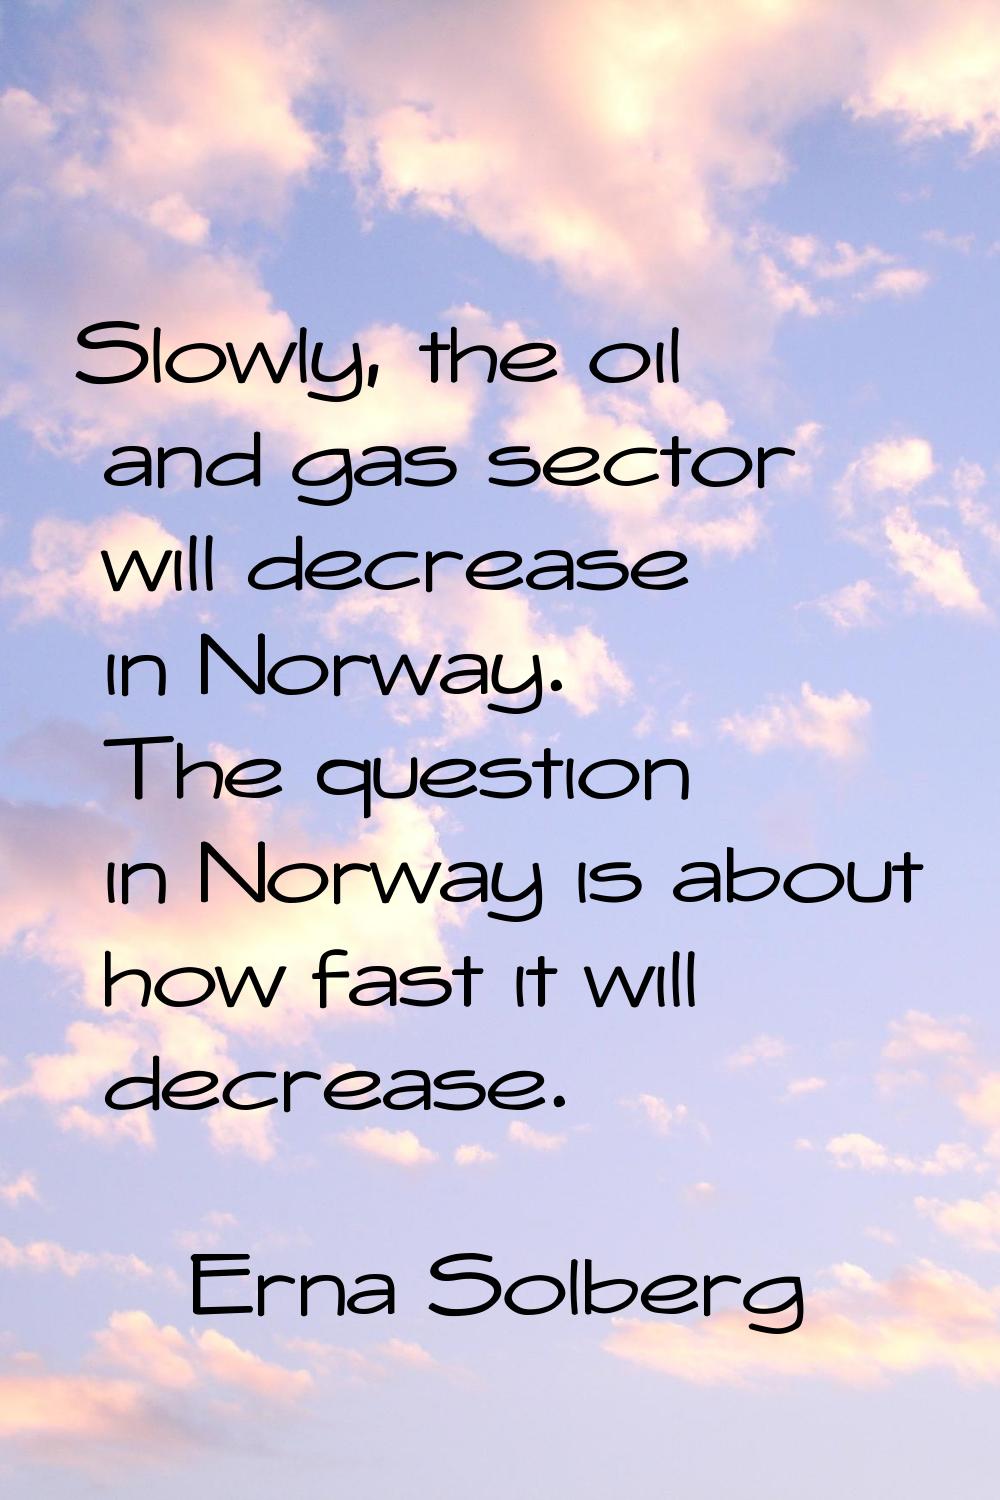 Slowly, the oil and gas sector will decrease in Norway. The question in Norway is about how fast it